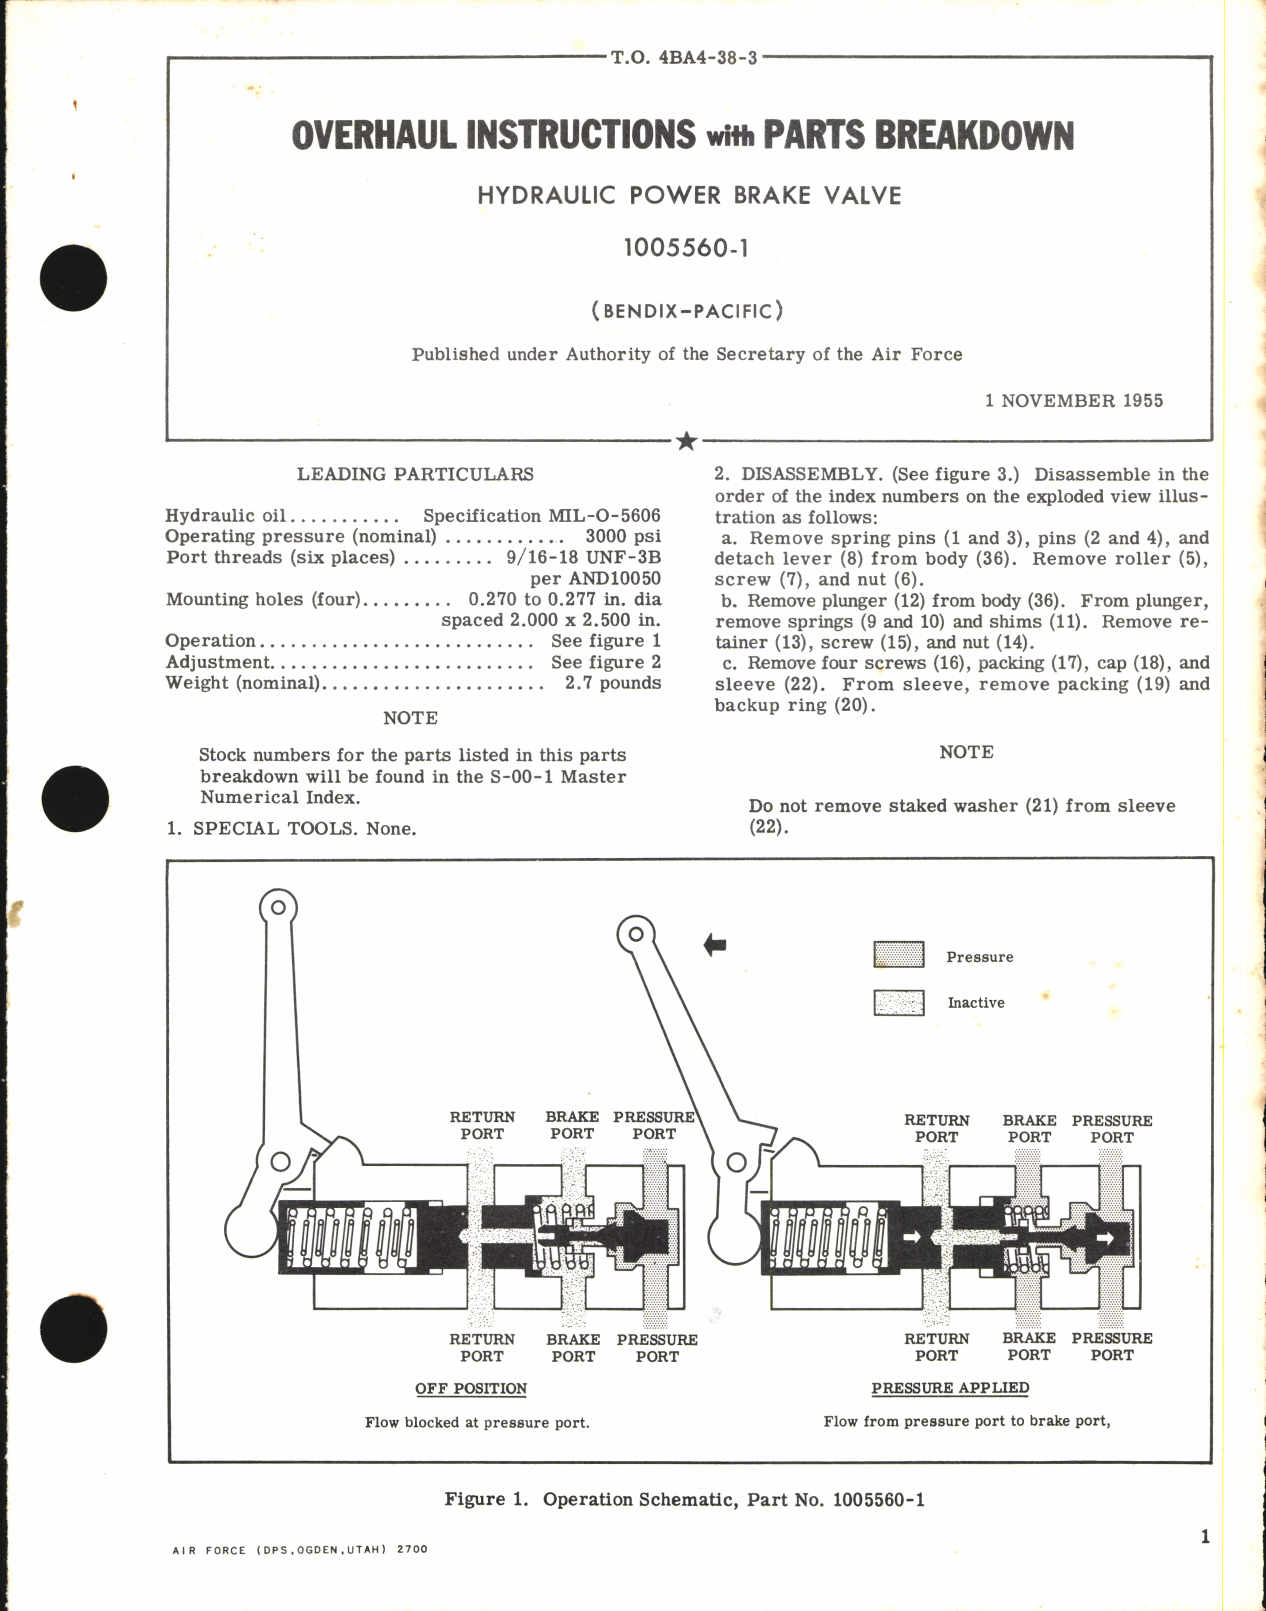 Sample page 1 from AirCorps Library document: Overhaul Instructions with Parts Breakdown for Hydraulic Power Brake Valve